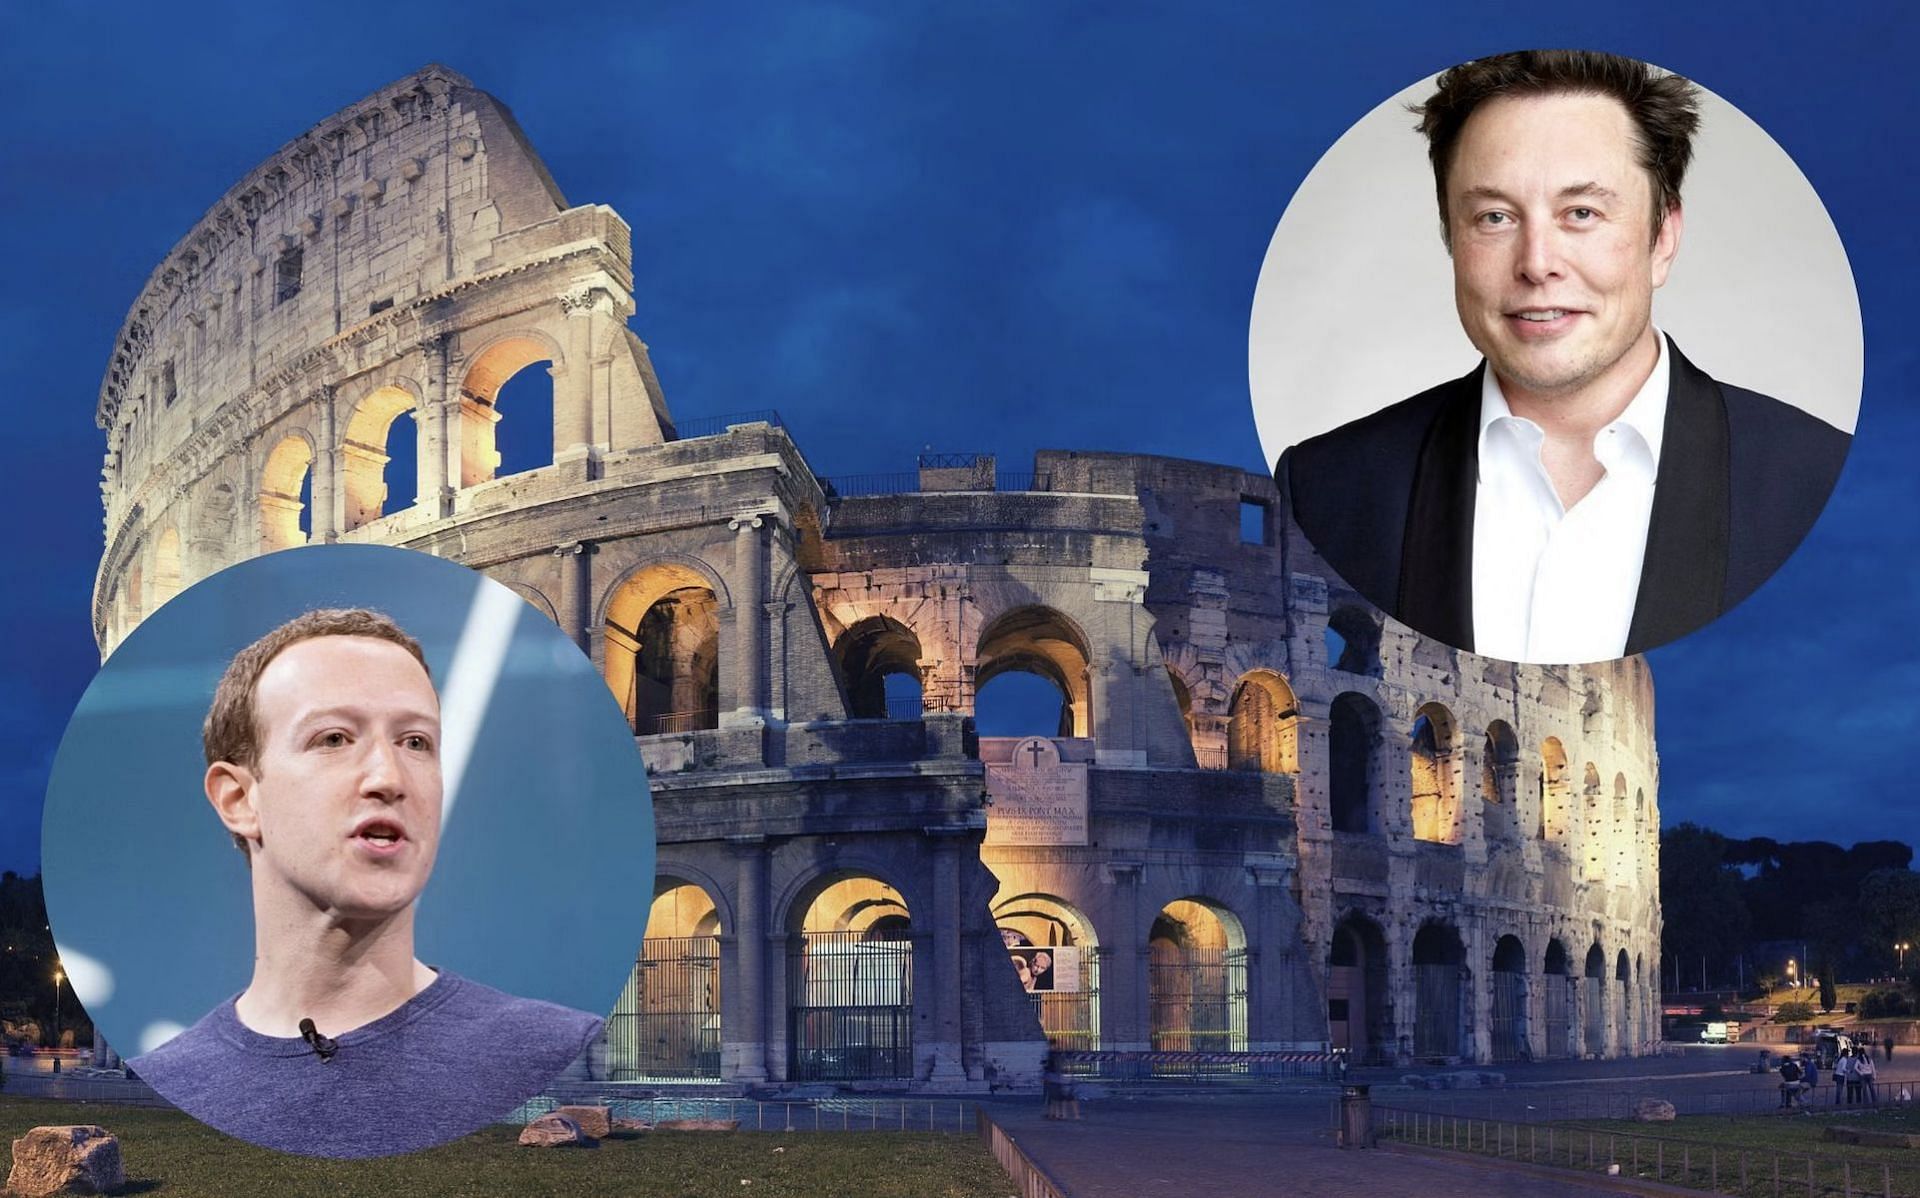 Mark Zuckerberg and Elon Musk agree to fight in the Colosseum [Images via Wikimedia Commons]